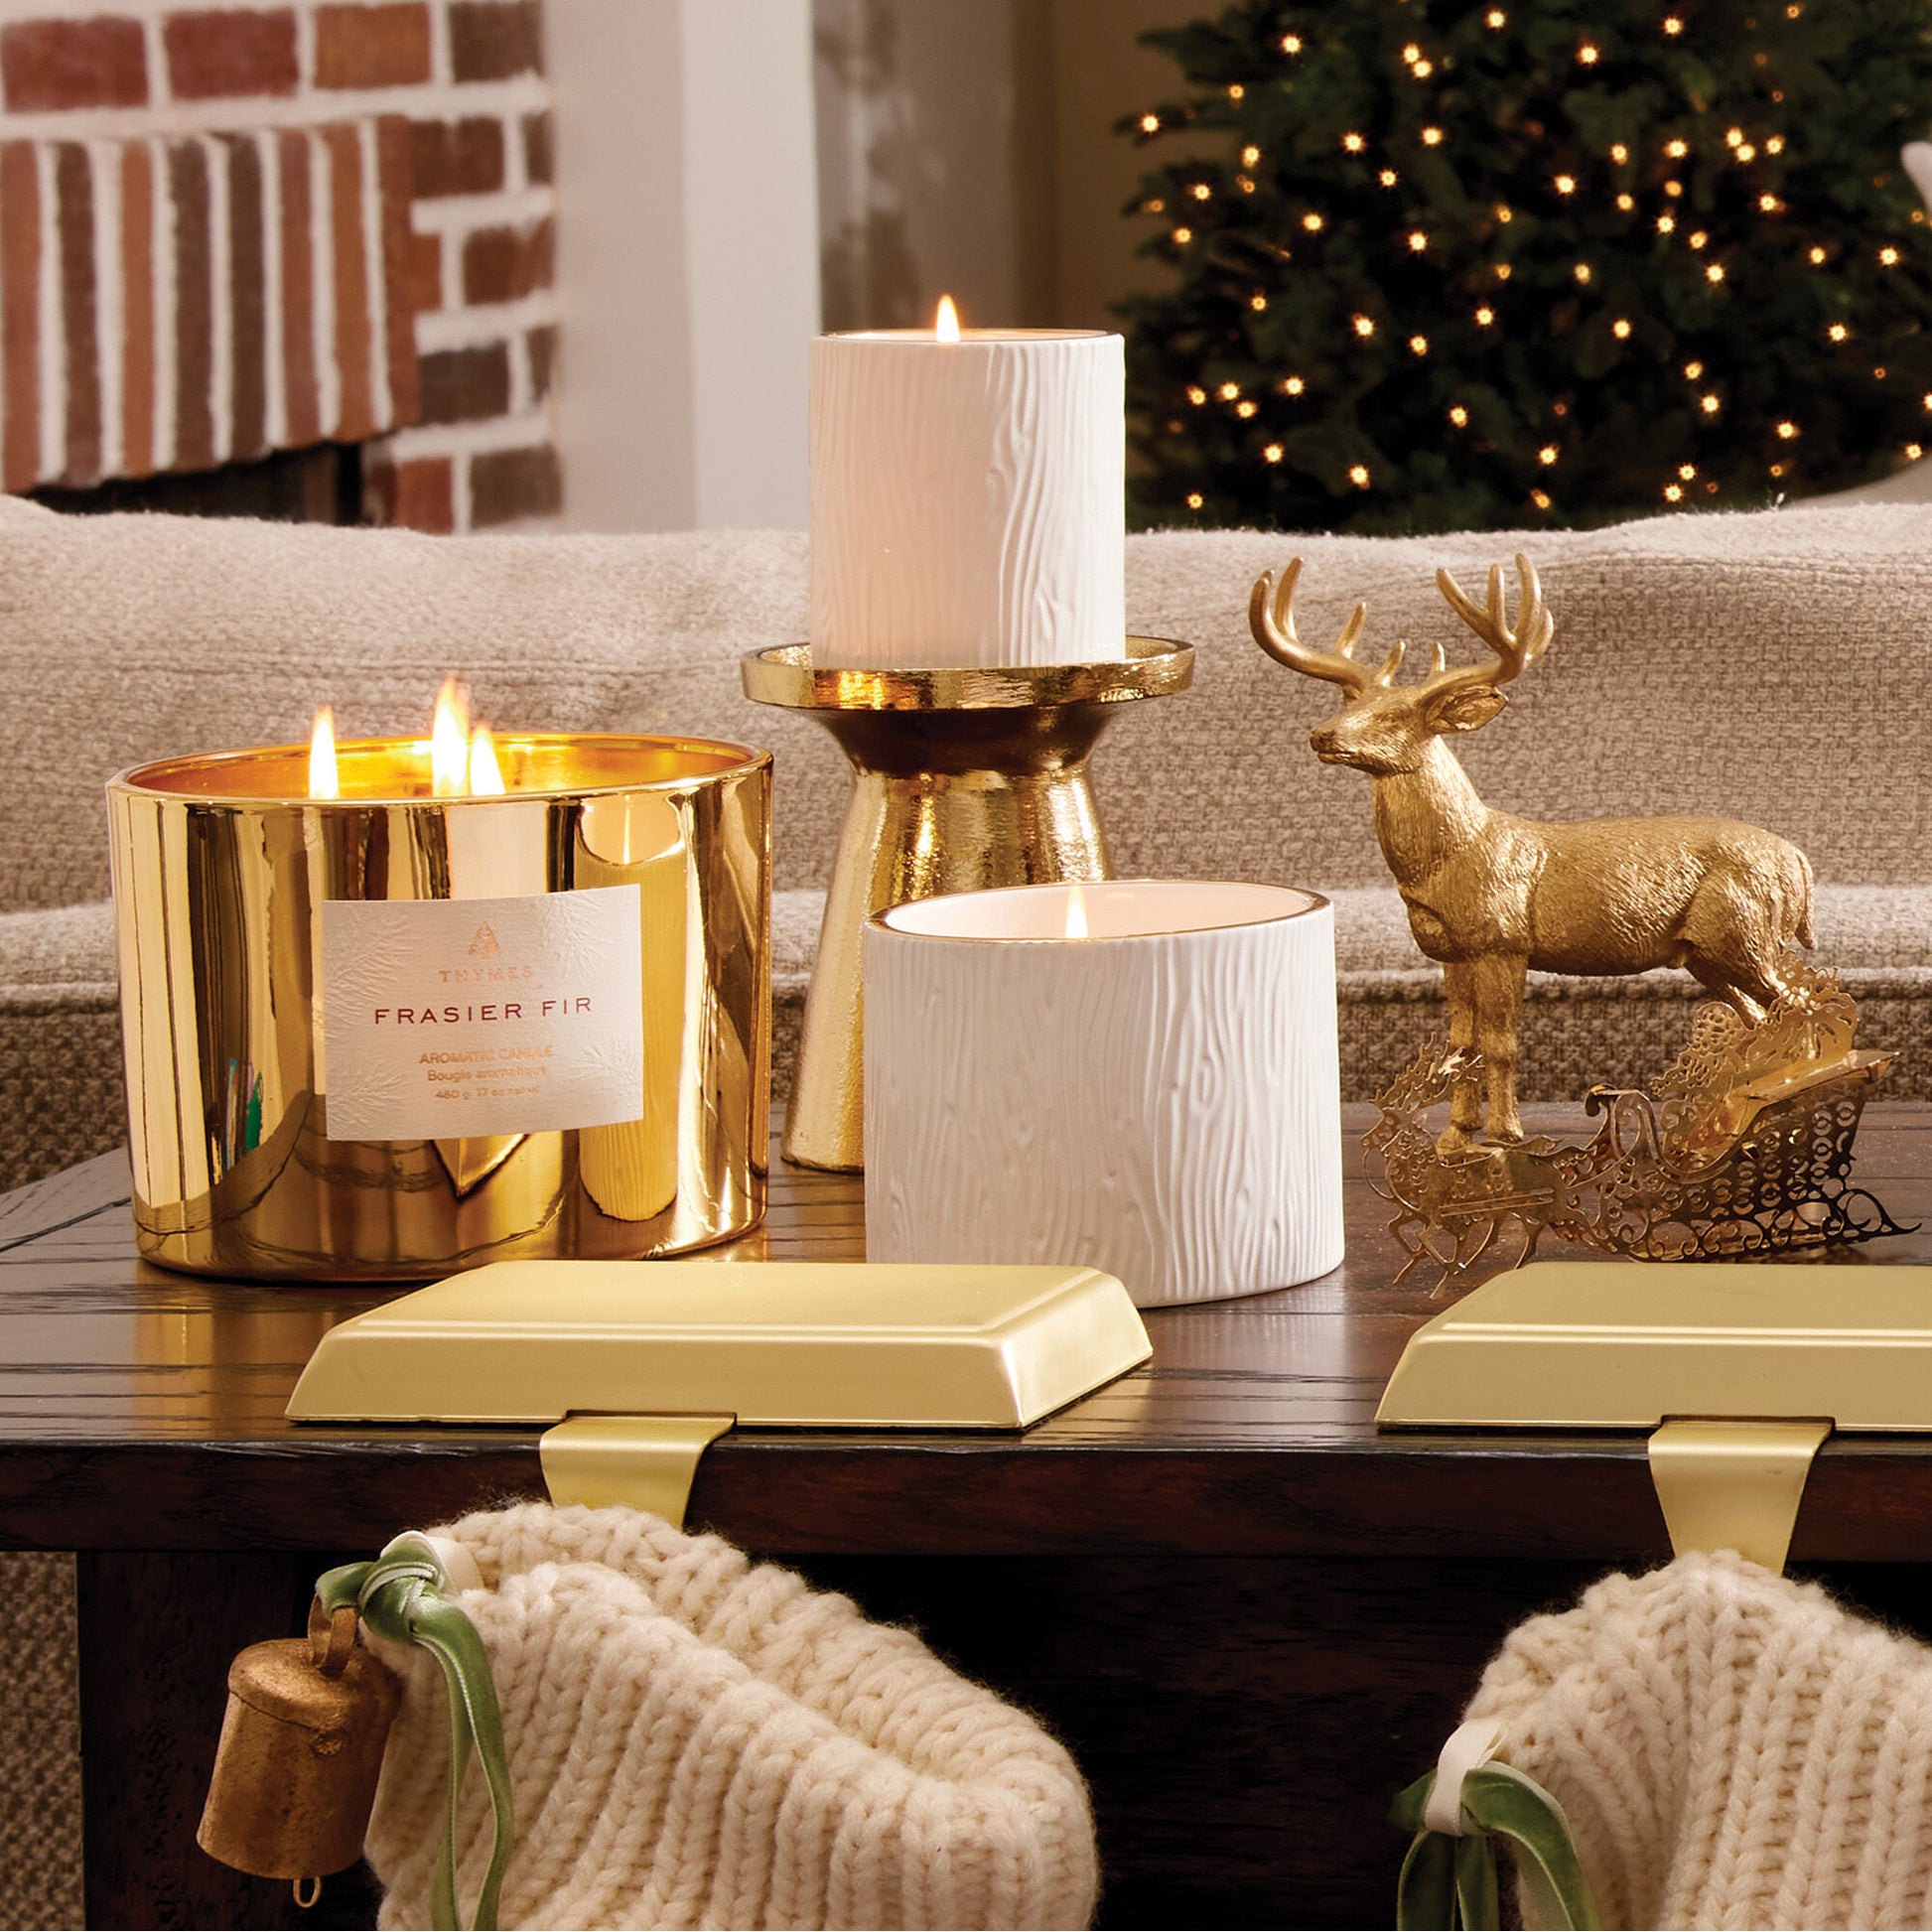 Thymes Frasier Fir Petite Ceramic Candle-Candles-Thymes-The Village Shoppe, Women’s Fashion Boutique, Shop Online and In Store - Located in Muscle Shoals, AL.